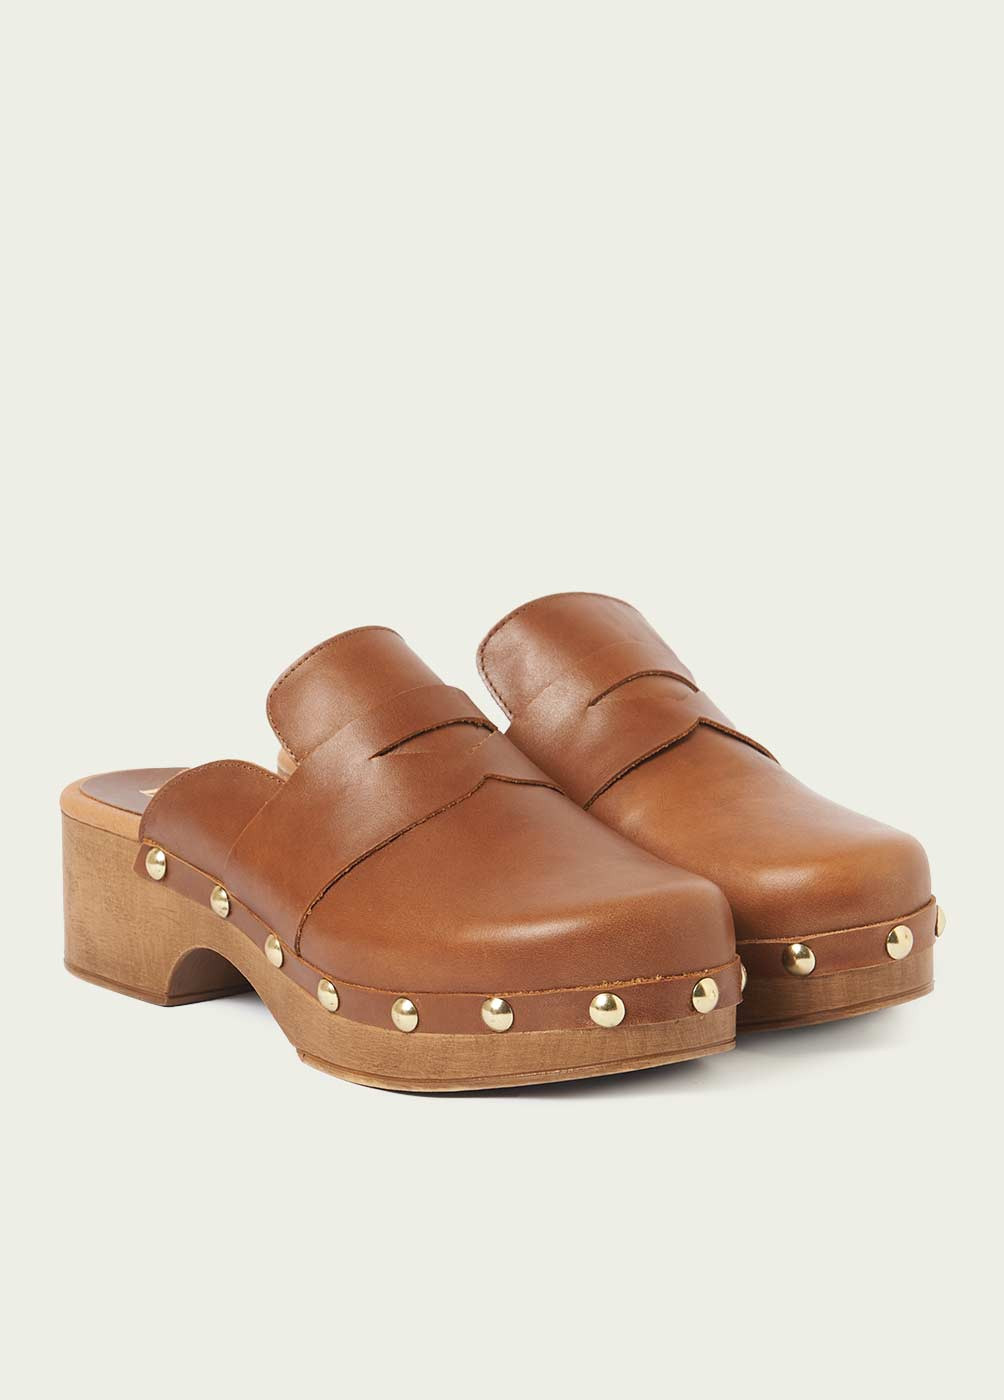 LEATHER CLOGS W/ PENNY LOAFER DETAIL